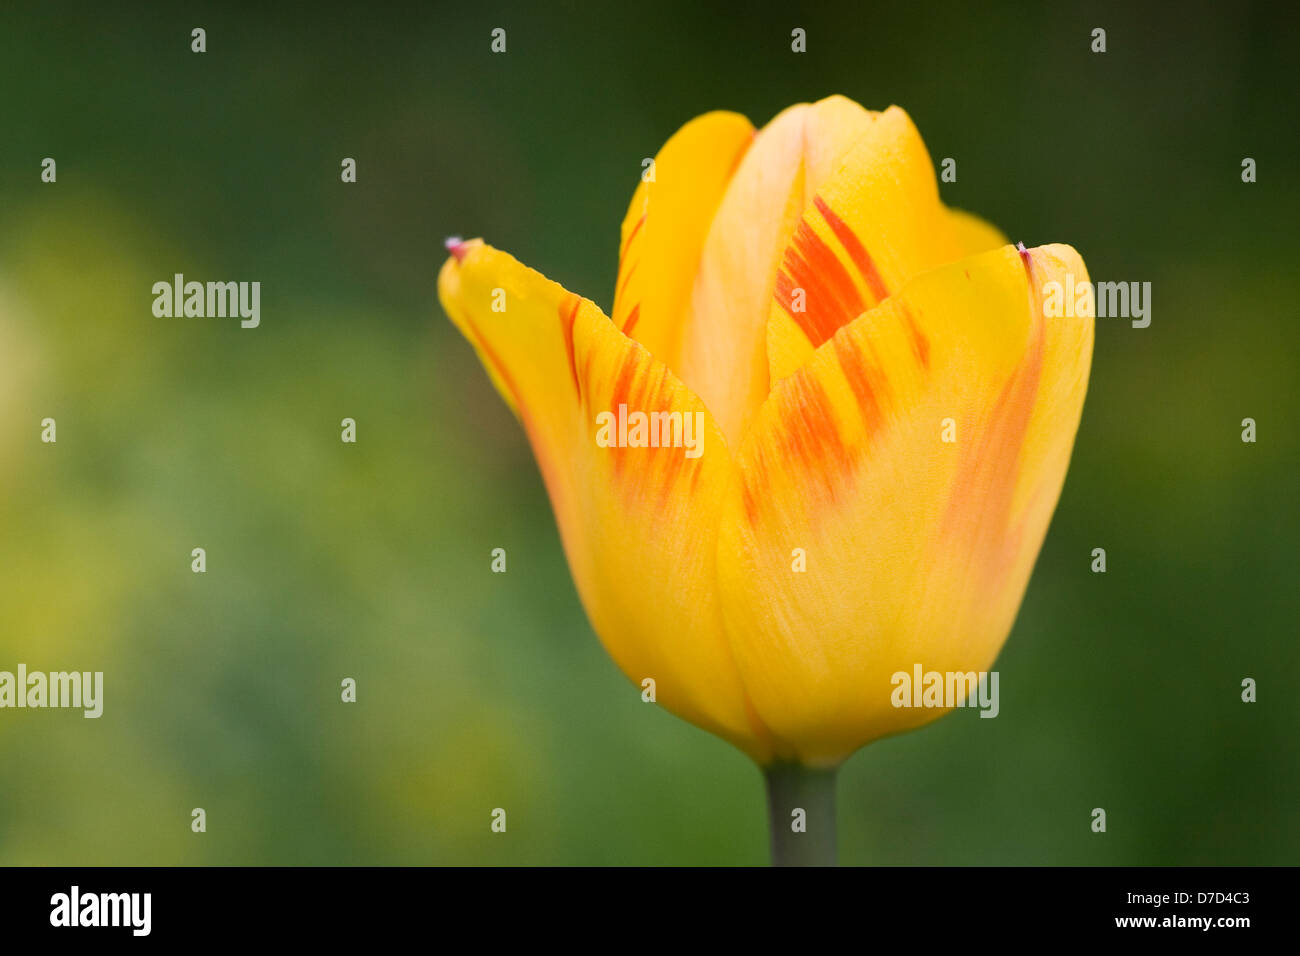 Yellow and red striped tulip growing in an English garden. Stock Photo